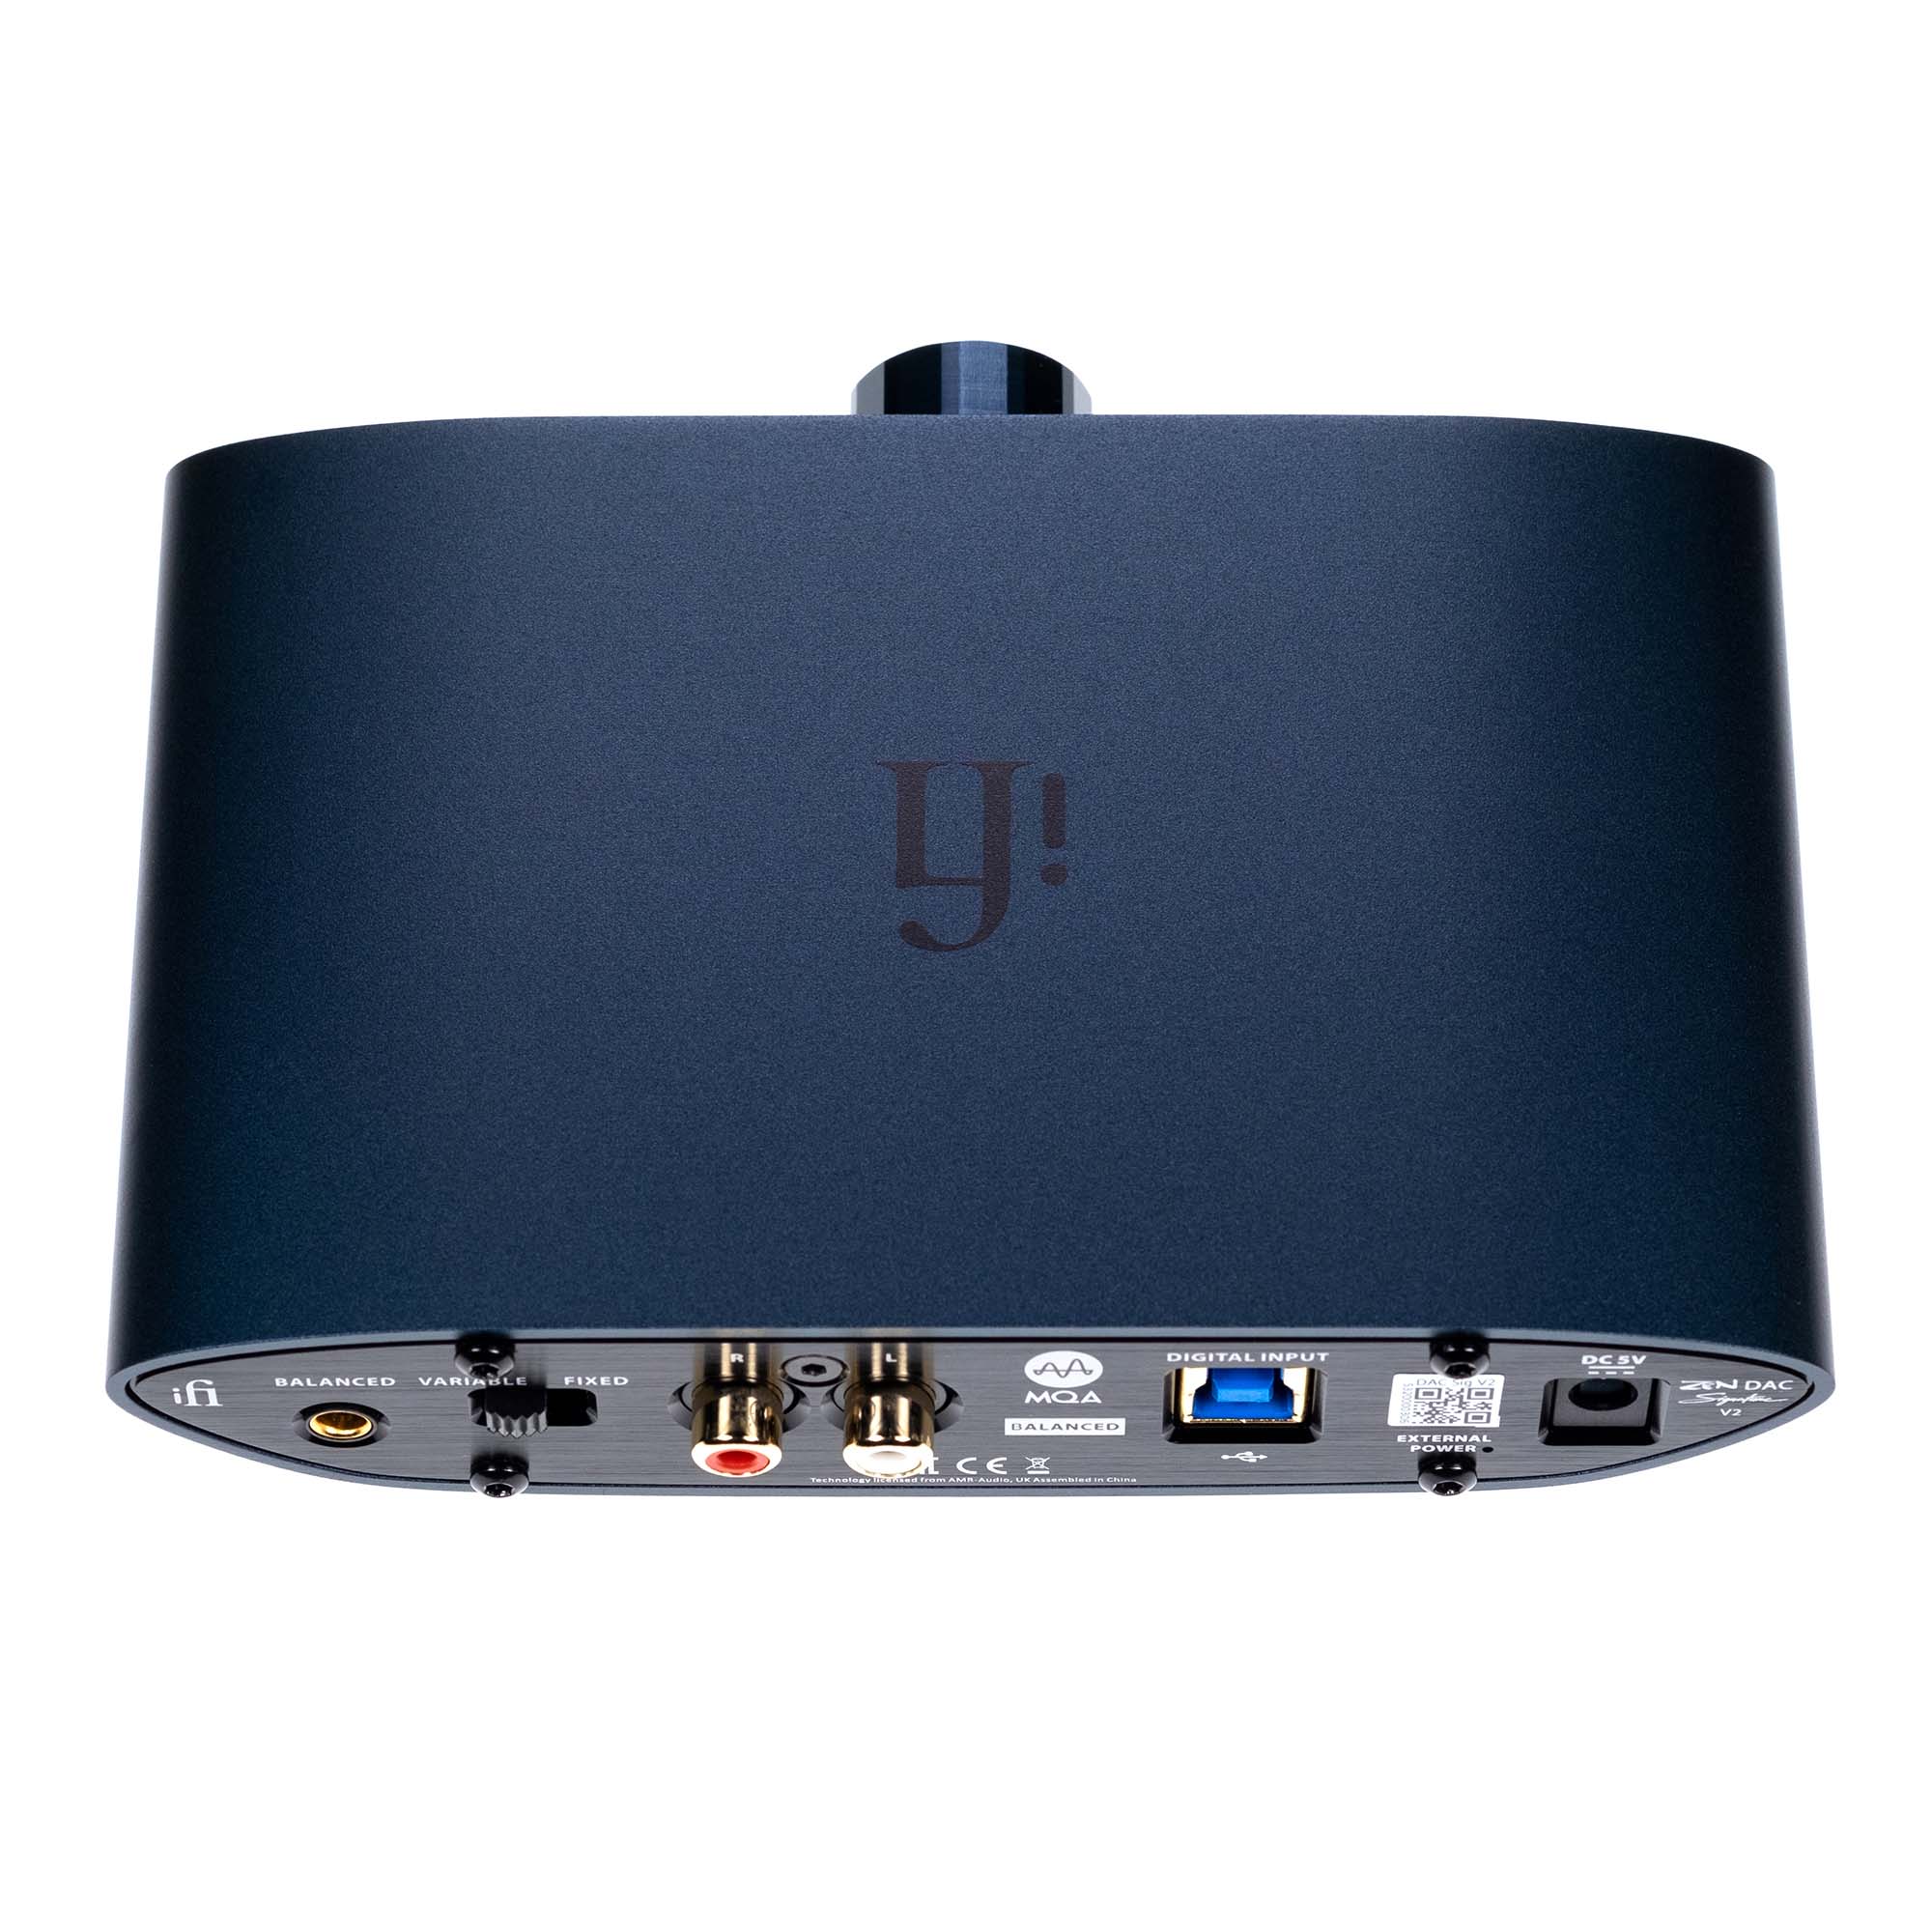 ZEN DAC V2 by iFi audio - Super-affordable DAC/amp from iFi audio